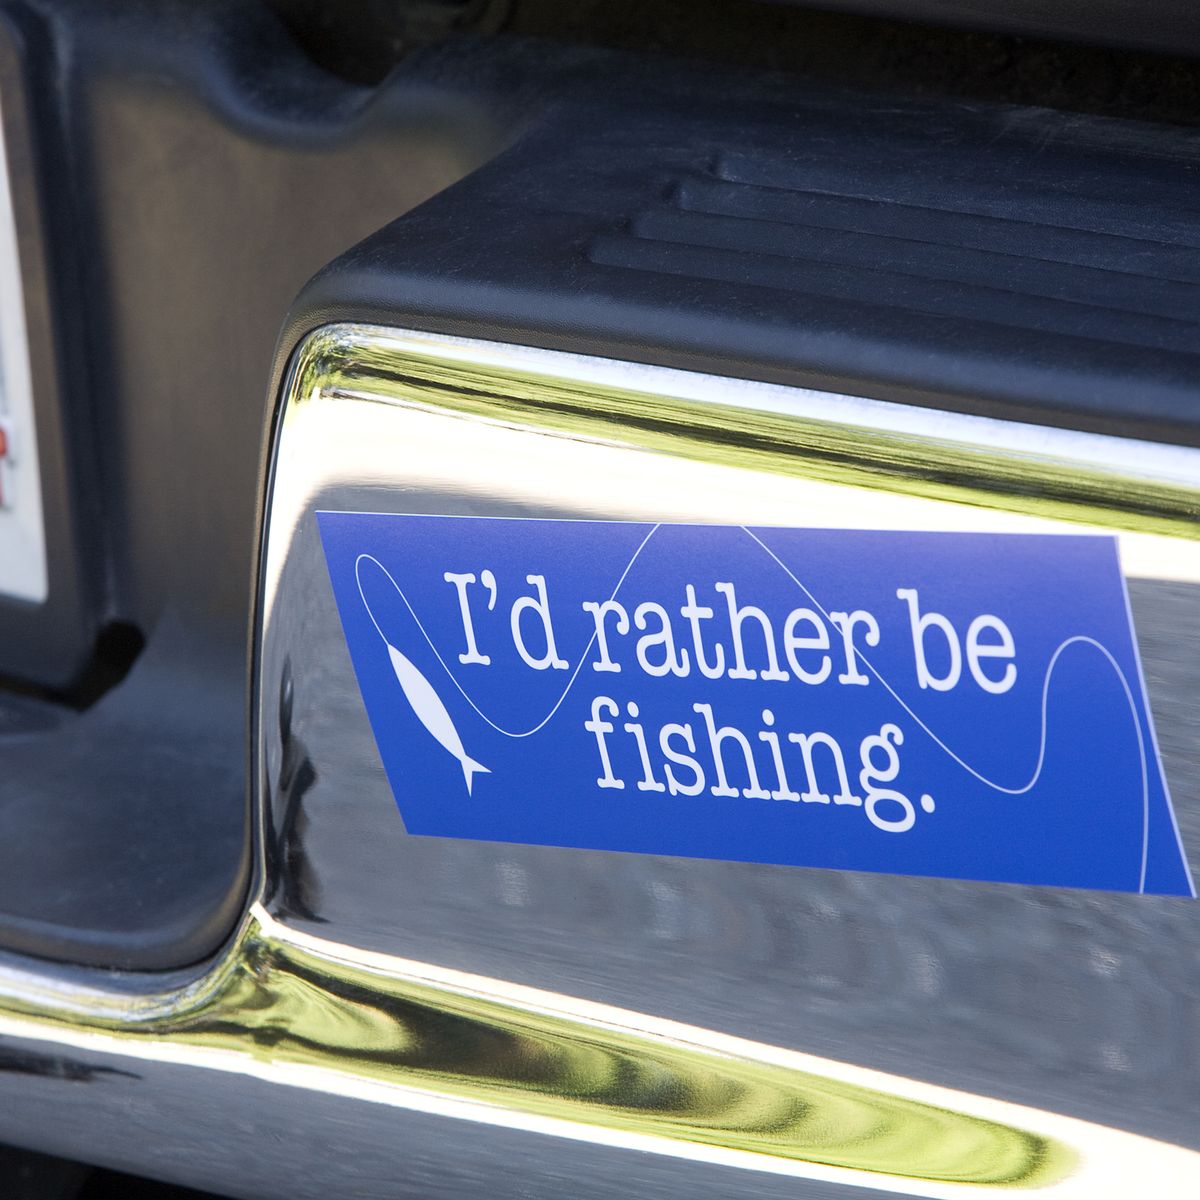 https://hips.hearstapps.com/hmg-prod/images/fishing-bumper-sticker-on-car-royalty-free-image-1591372543.jpg?crop=0.72326xw:1xh;center,top&resize=1200:*